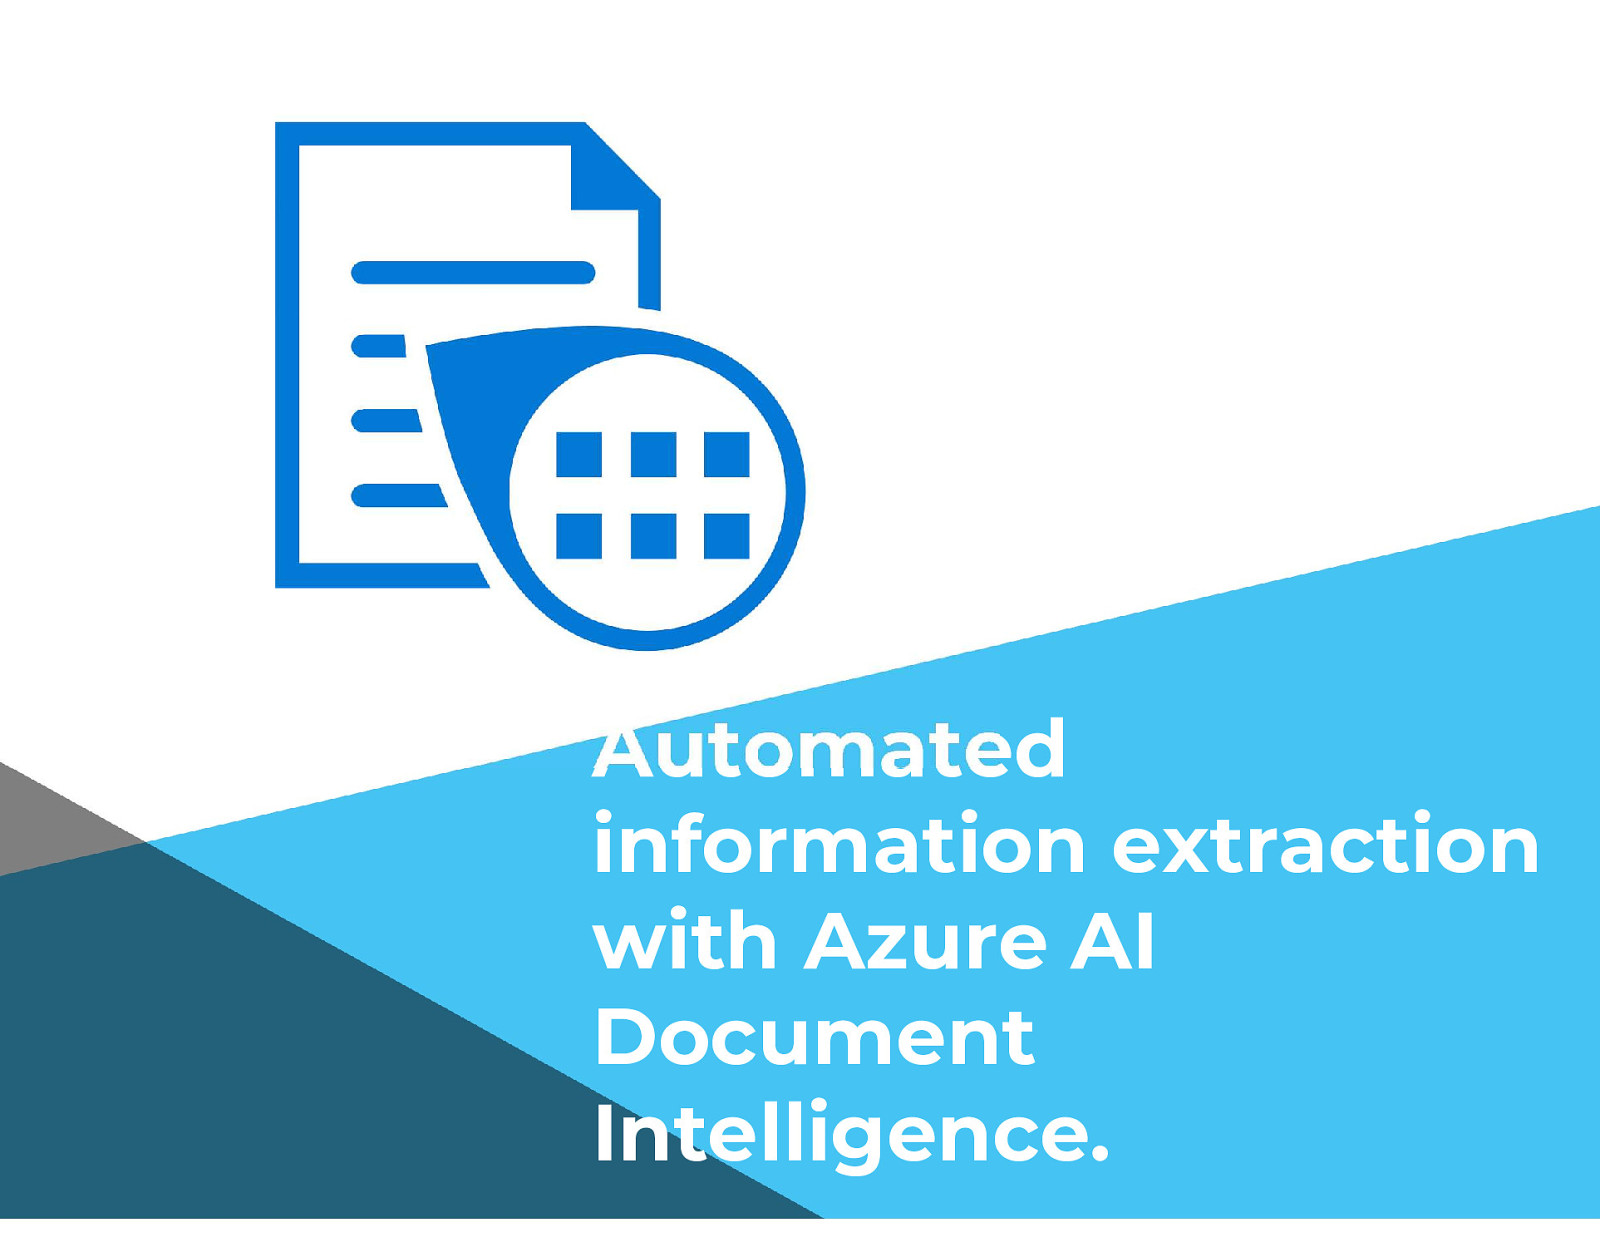 Automated information extraction with Azure AI Document Intelligence.